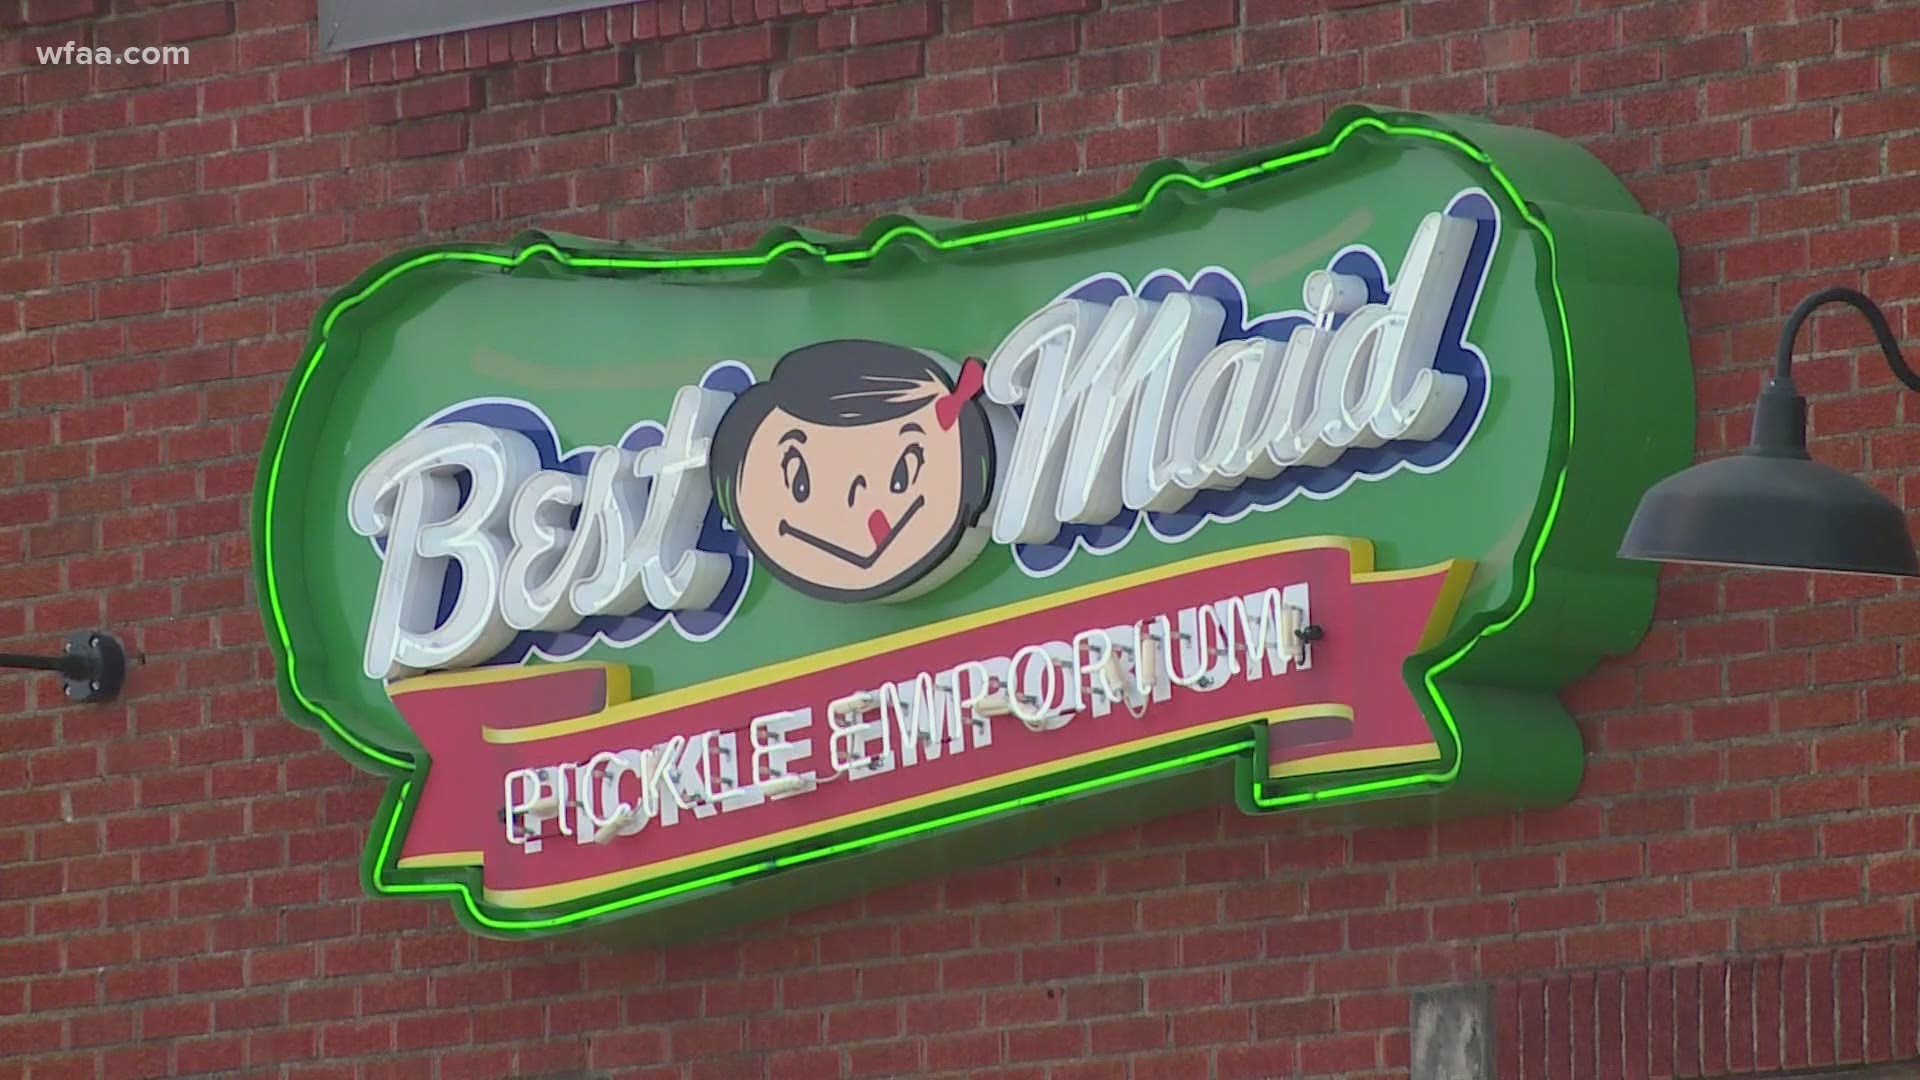 The Best Maid Pickle Emporium in Fort Worth is set to open Friday.